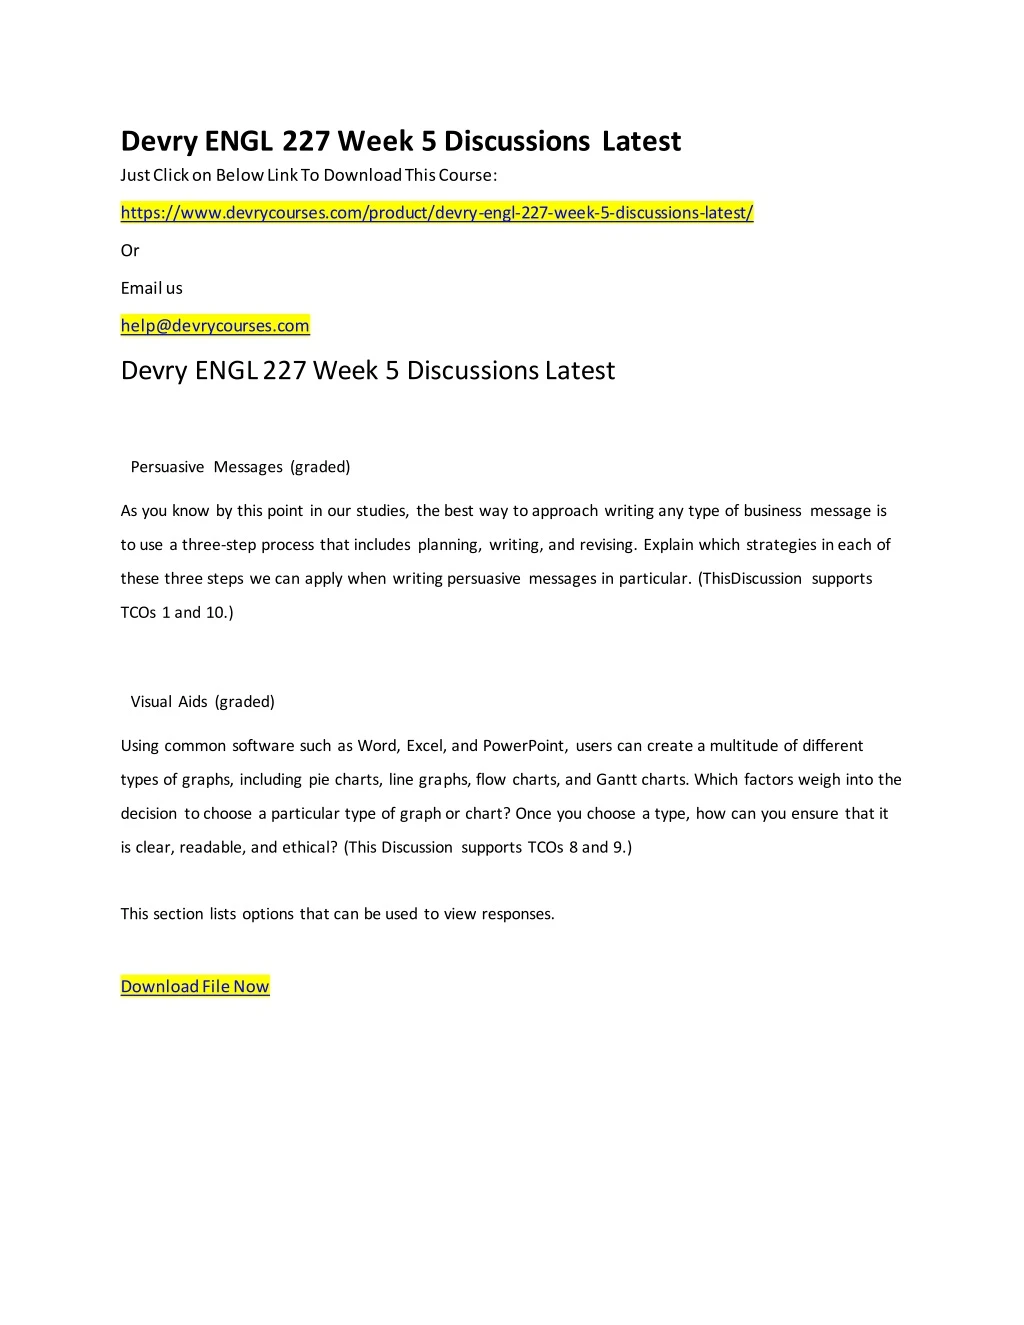 devry engl 227 week 5 discussions latest just